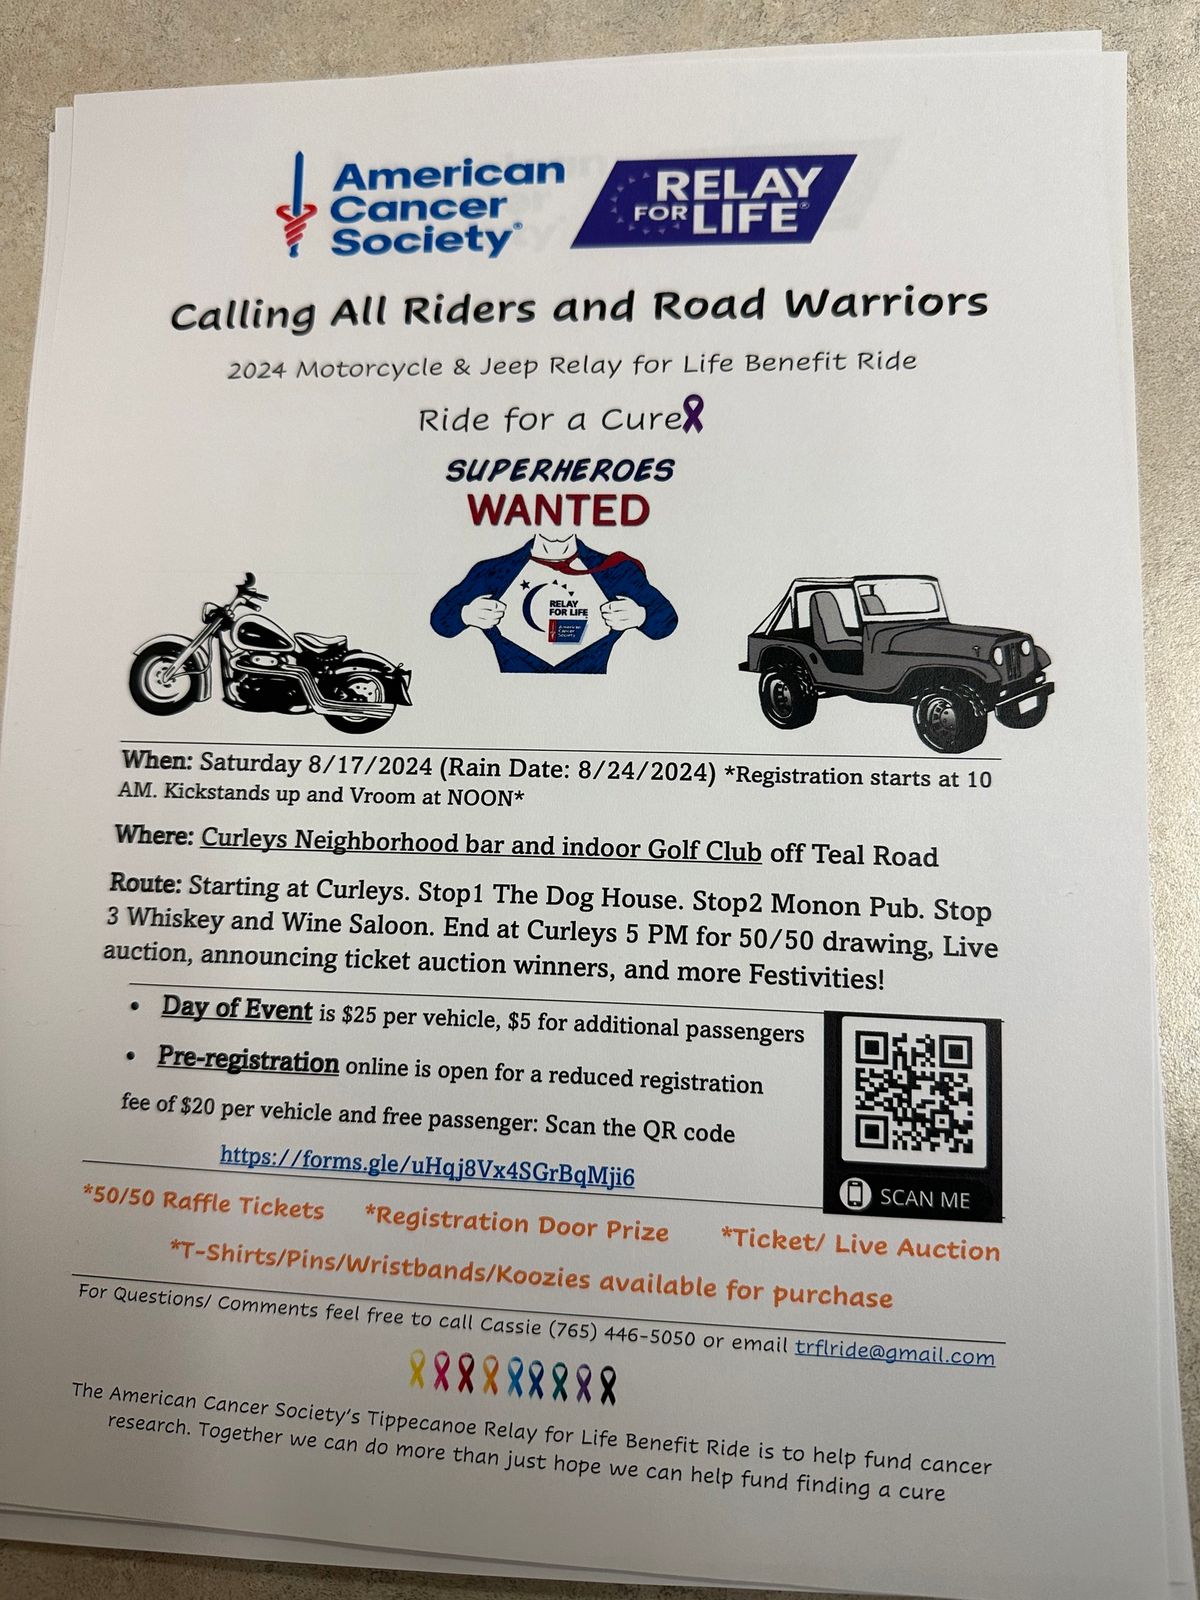 2024 Motorcycle & Jeep Relay for Life Benefit Ride